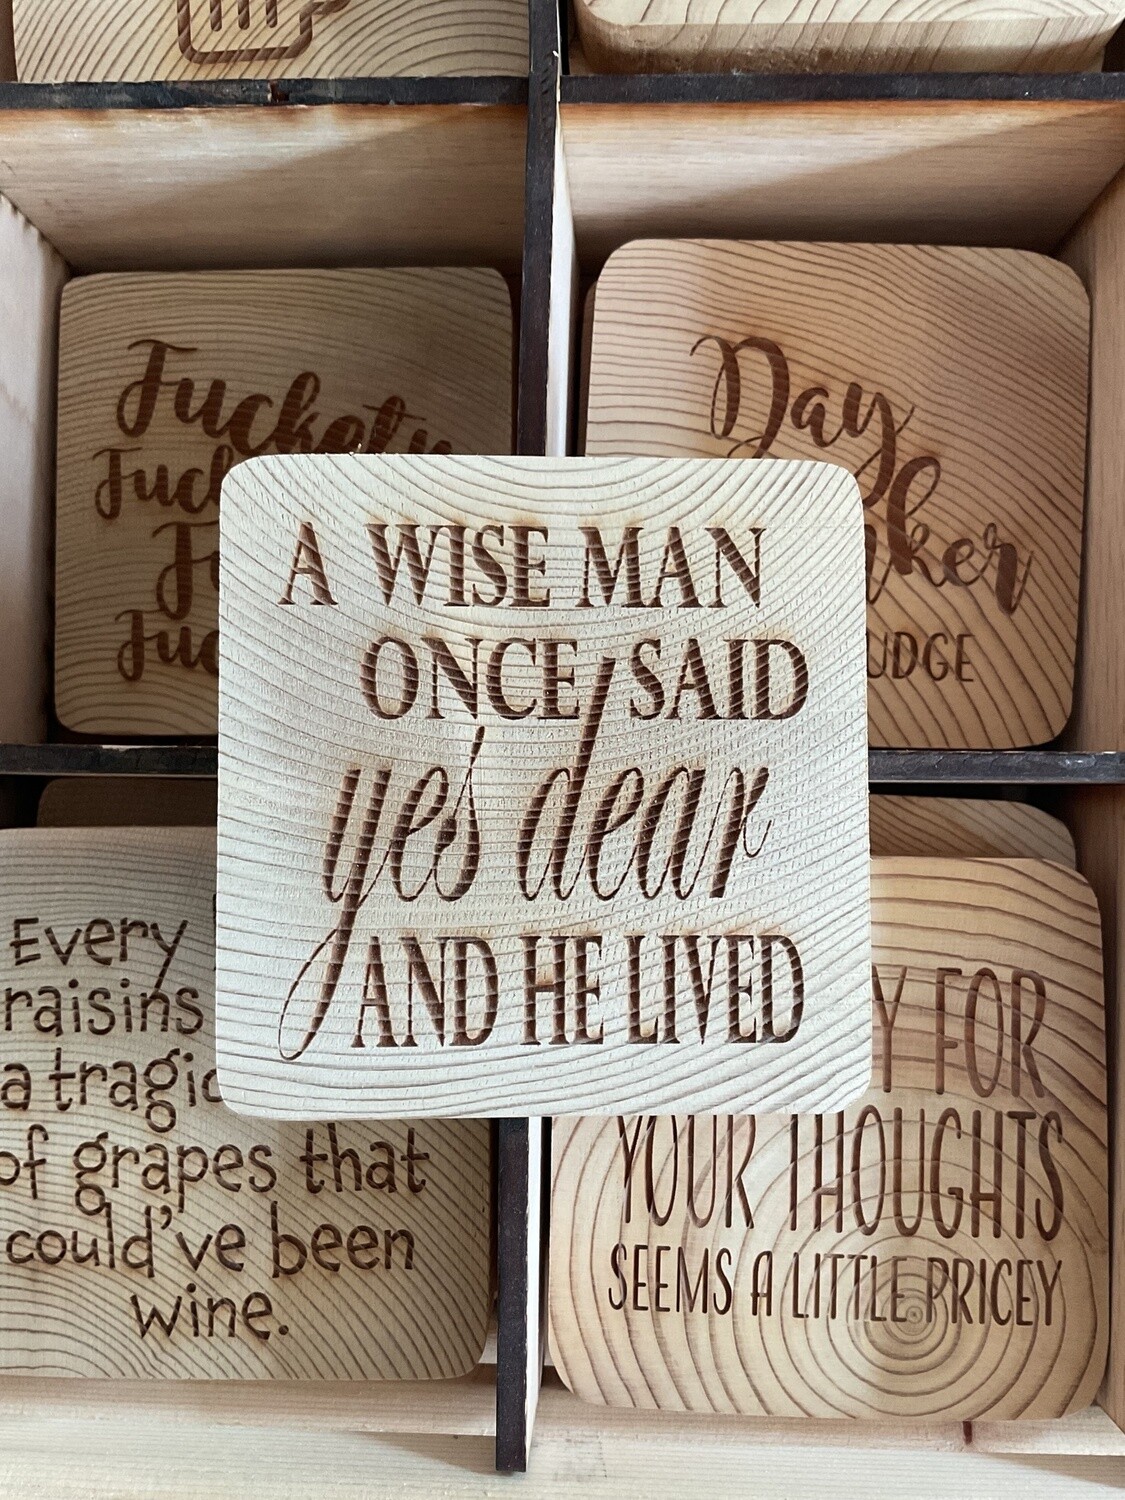 “A wise man once said yes dear and he lived” Wooden Coaster